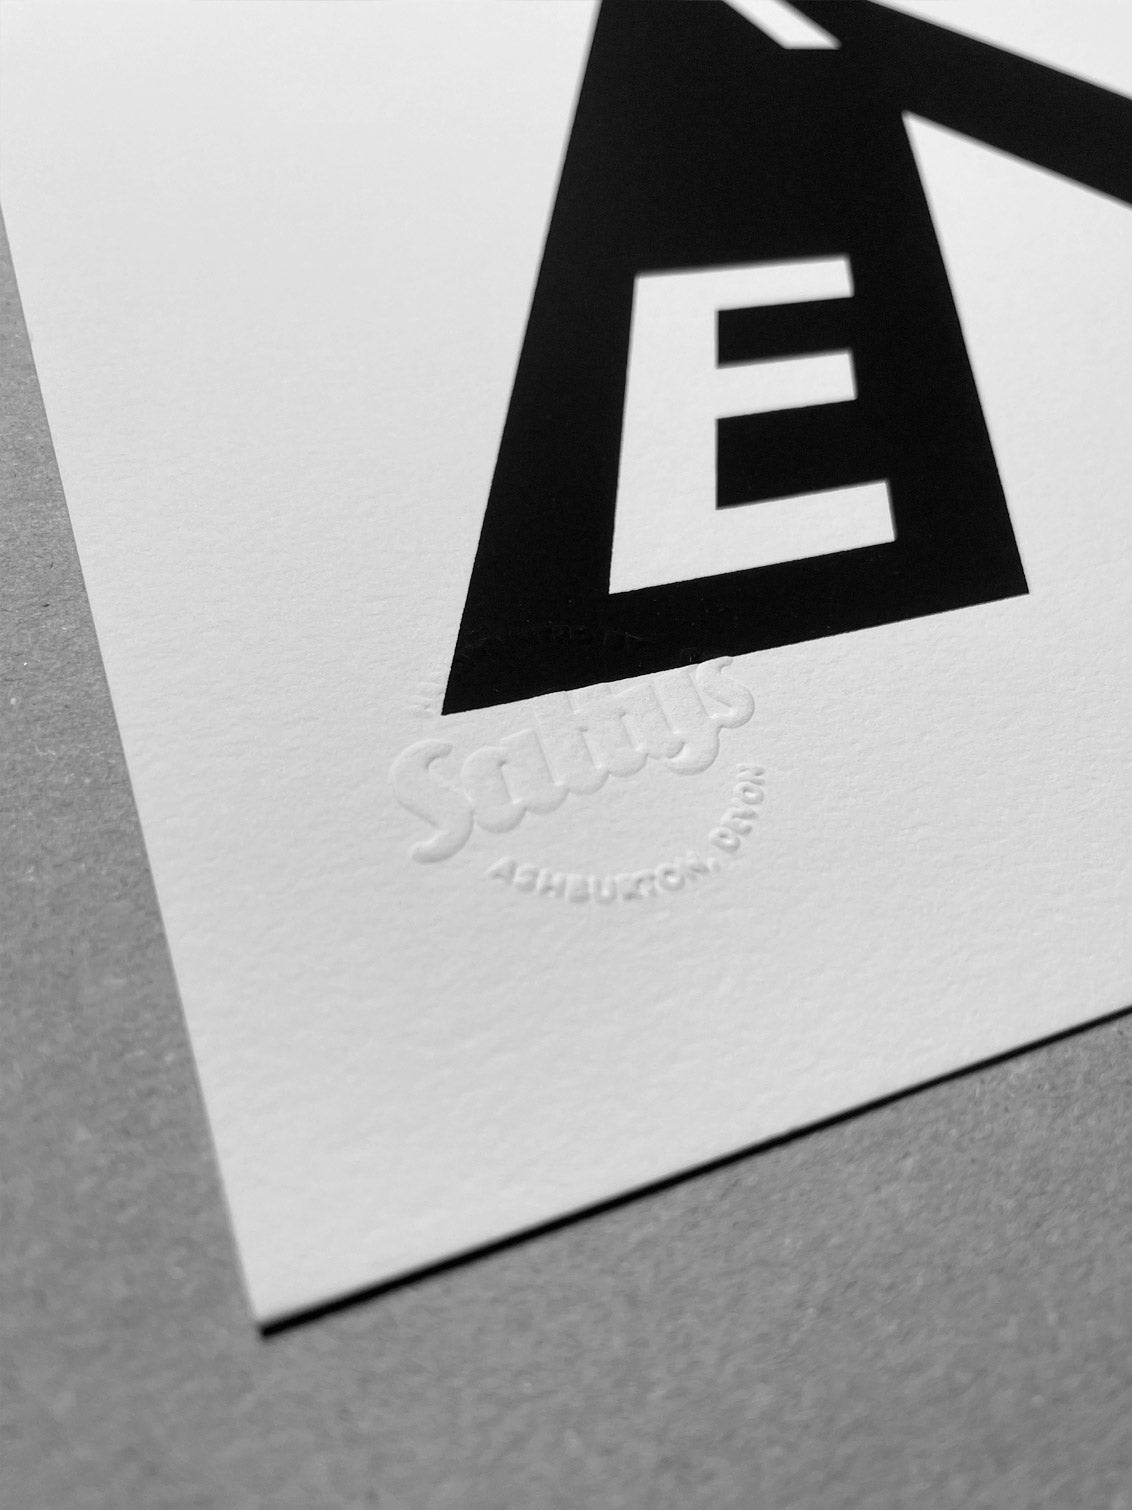 Exeter in Black. A3 Open Edition Collectables